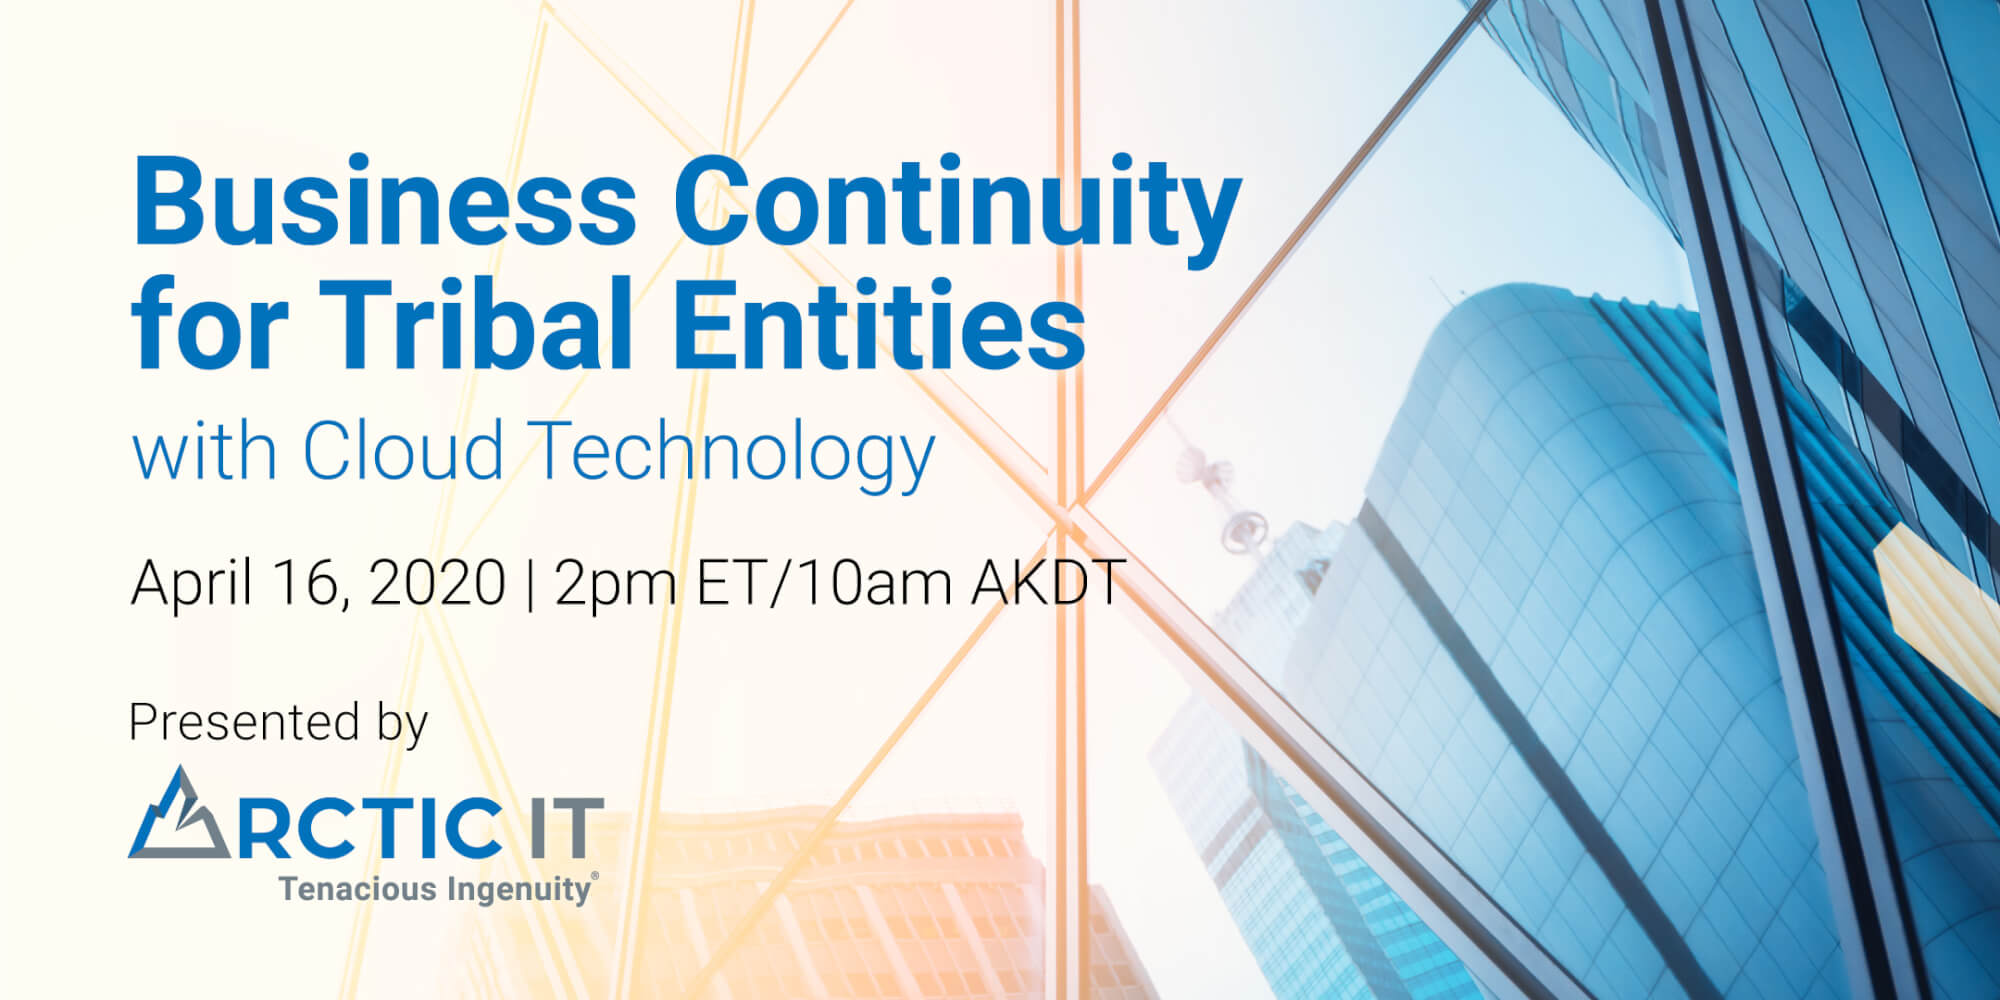 Business Continuity For Tribal Entities with Cloud Technology